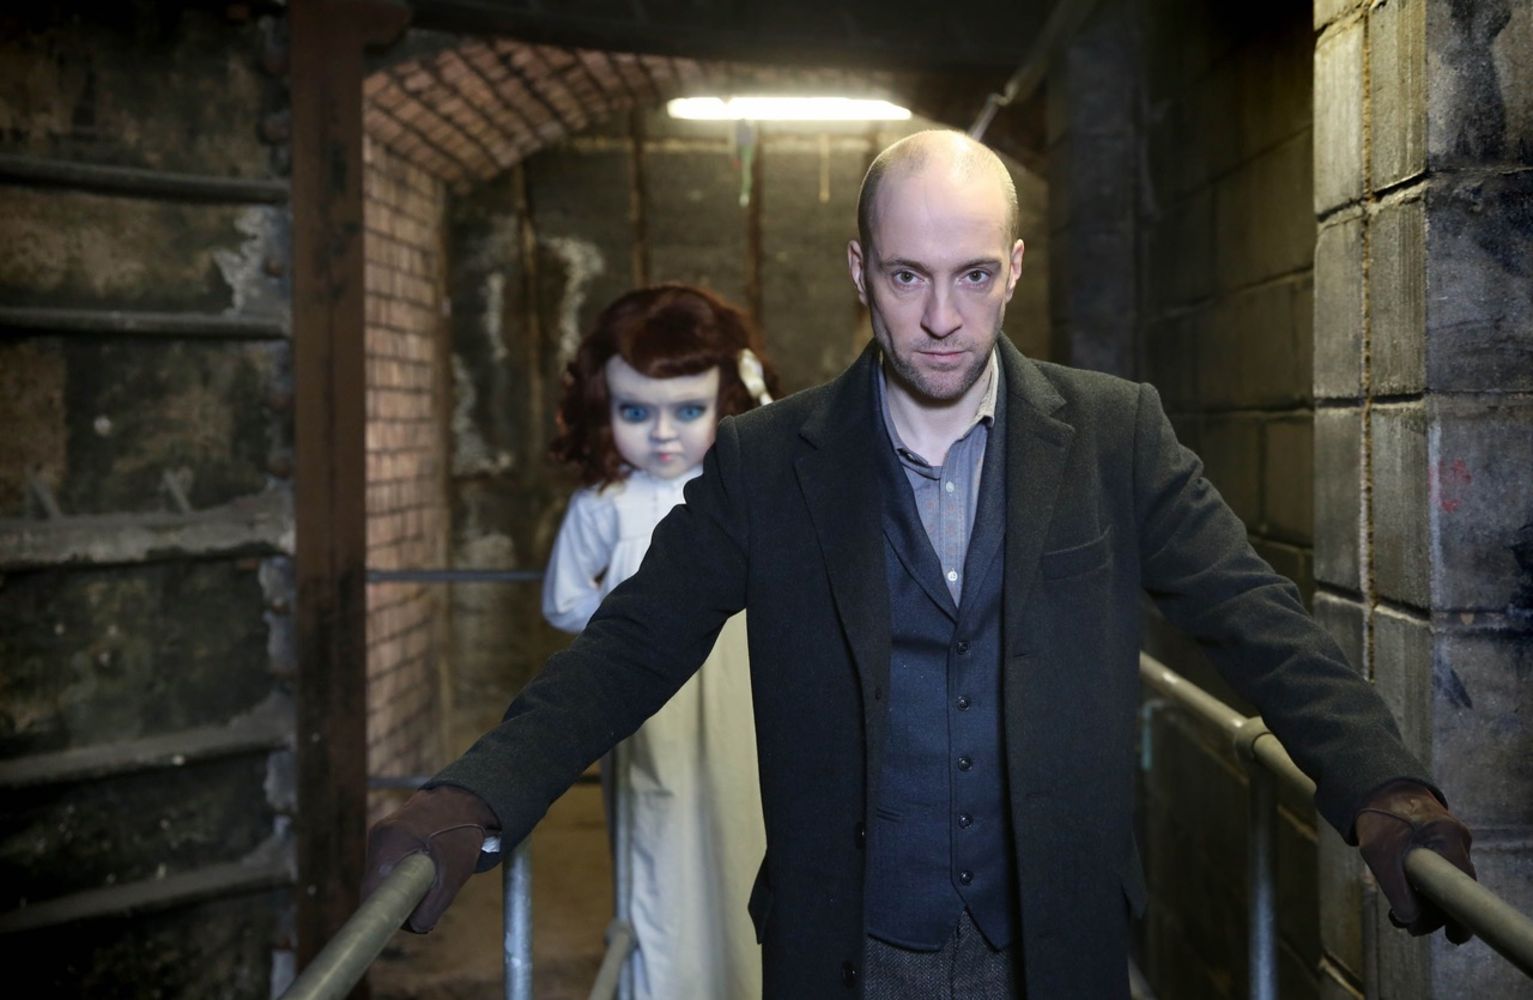 Derren Brown: The Selected Contents From Illusionist Derren Brown's Residence, To Include Items From His Private Taxidermy Collection